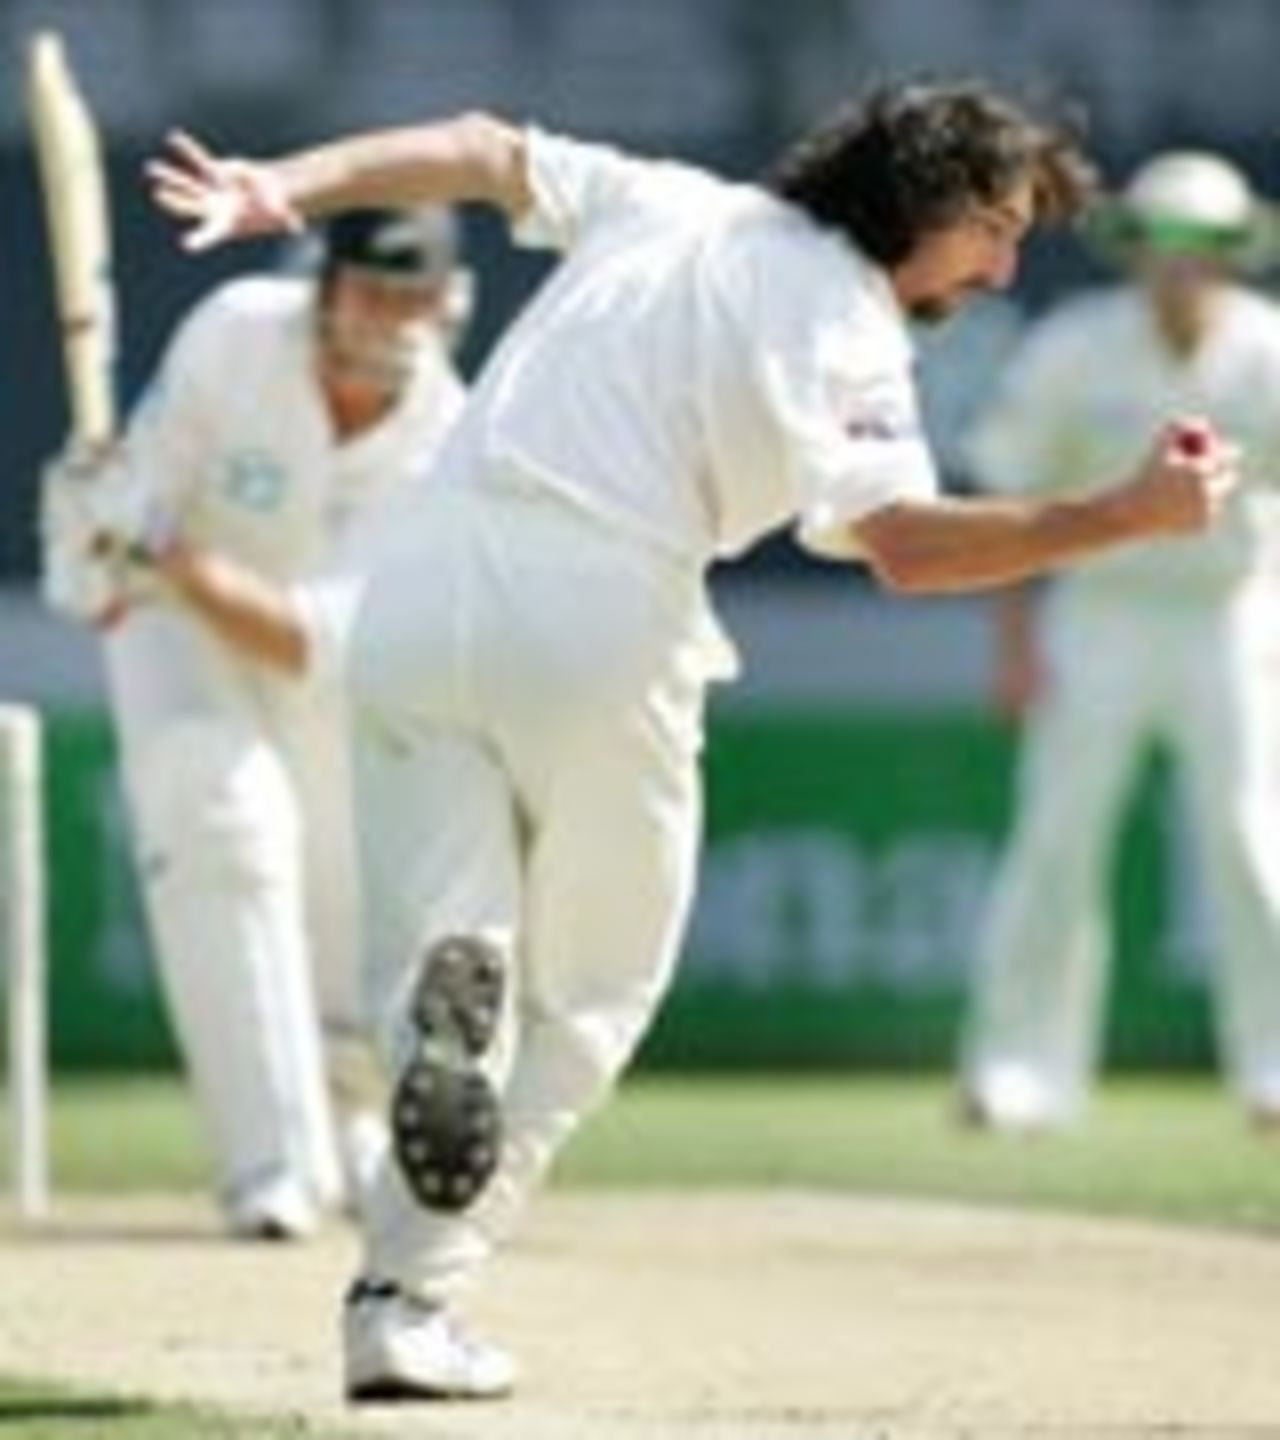 Jason Gillespie takes an incredible catch to dismiss Stephen Fleming, New Zealand v Australia, 3rd Test, Auckland, 4th day, March 29, 2005